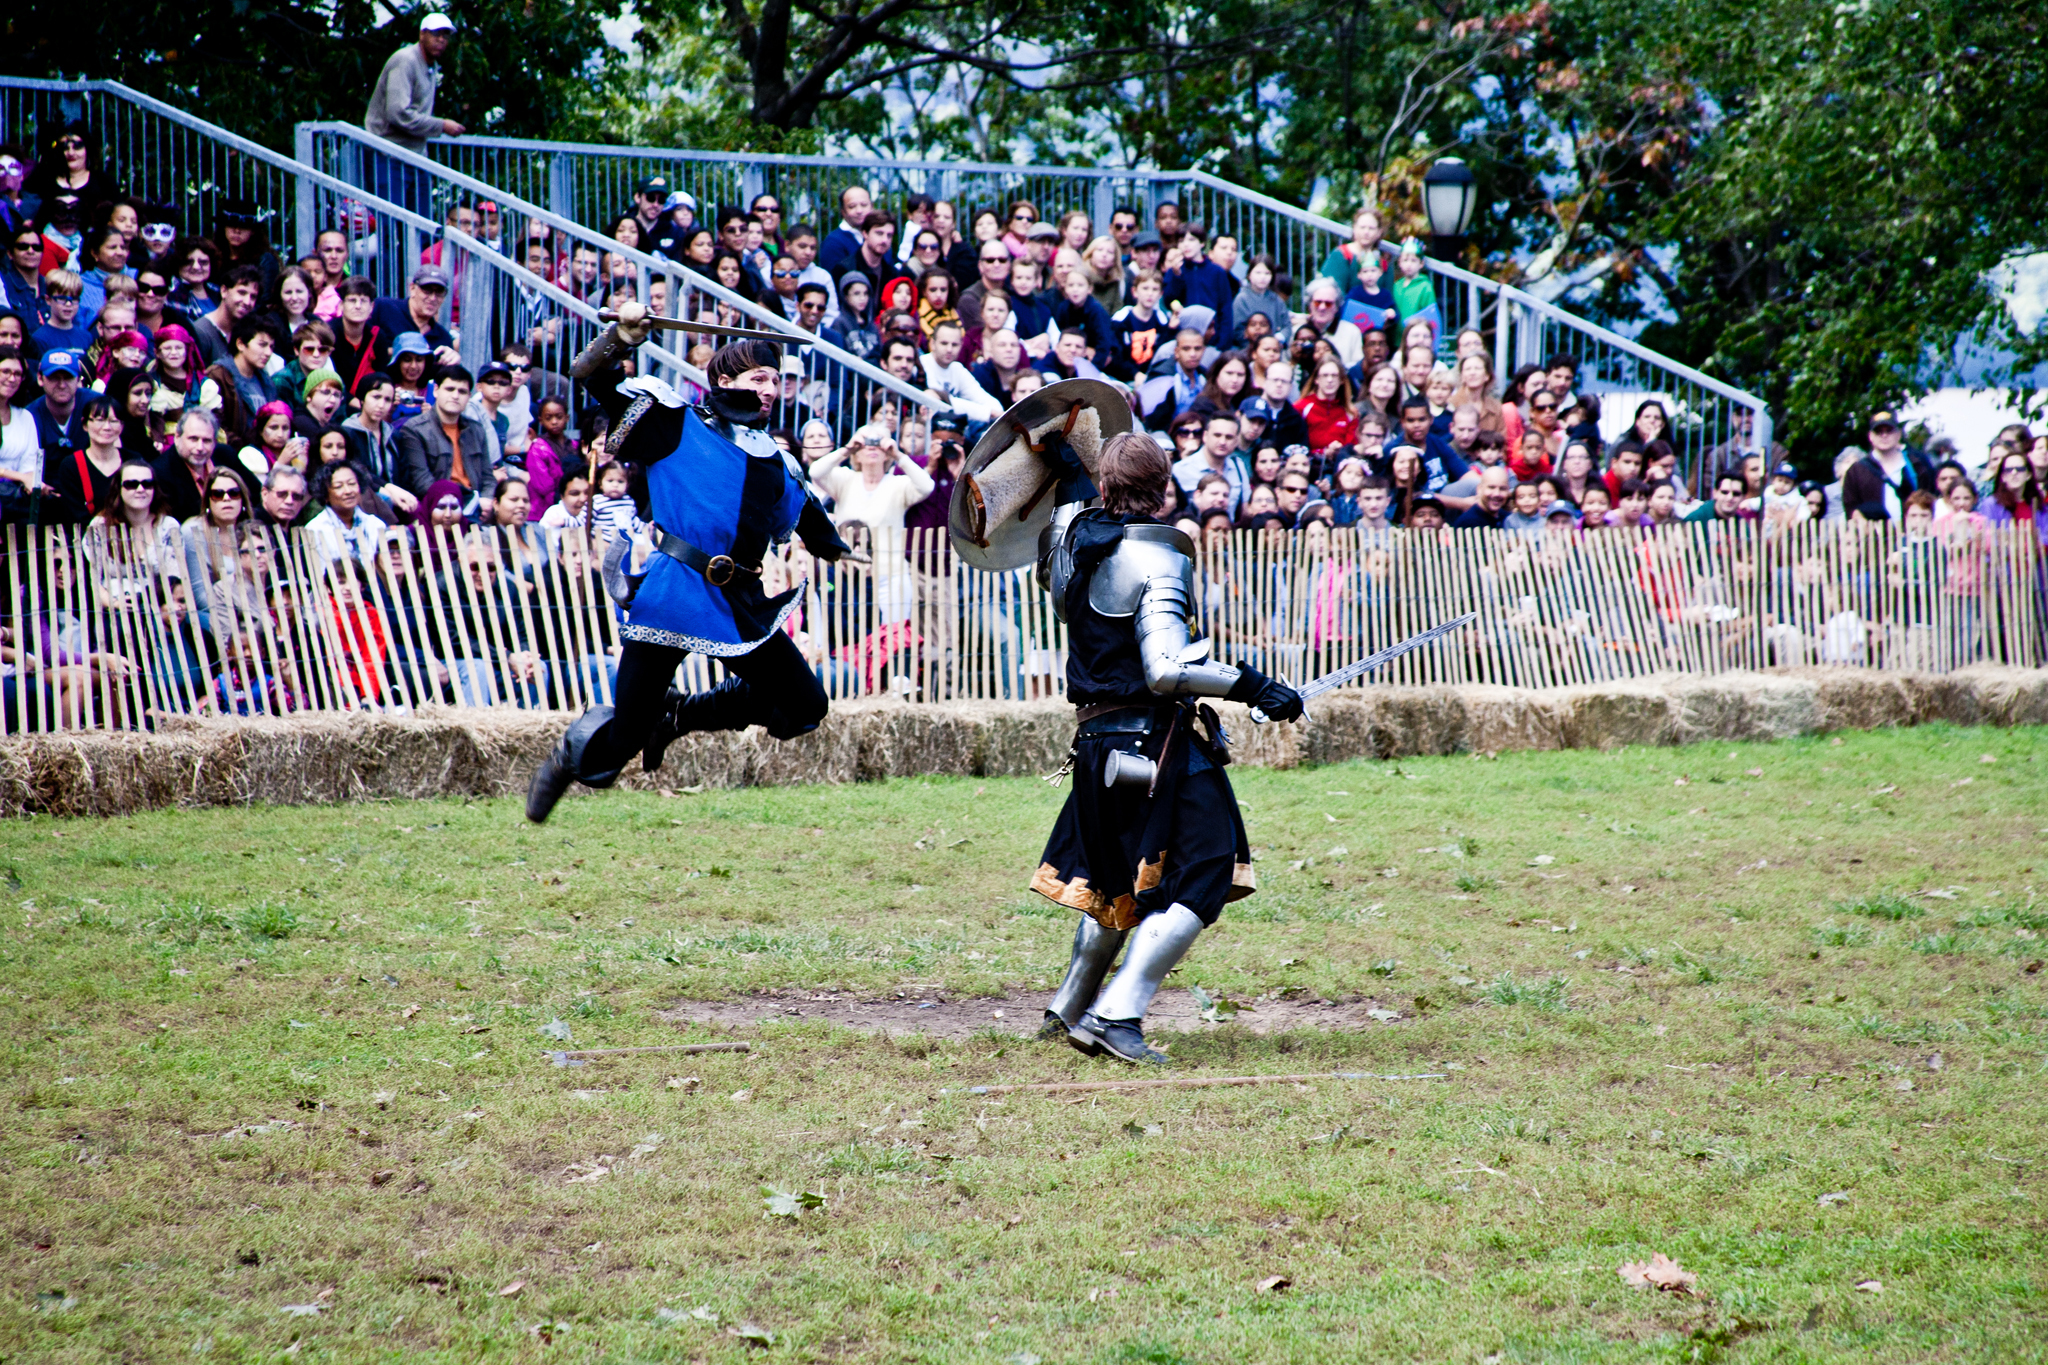 Everything you need to know about Sunday's Medieval Festival at Fort